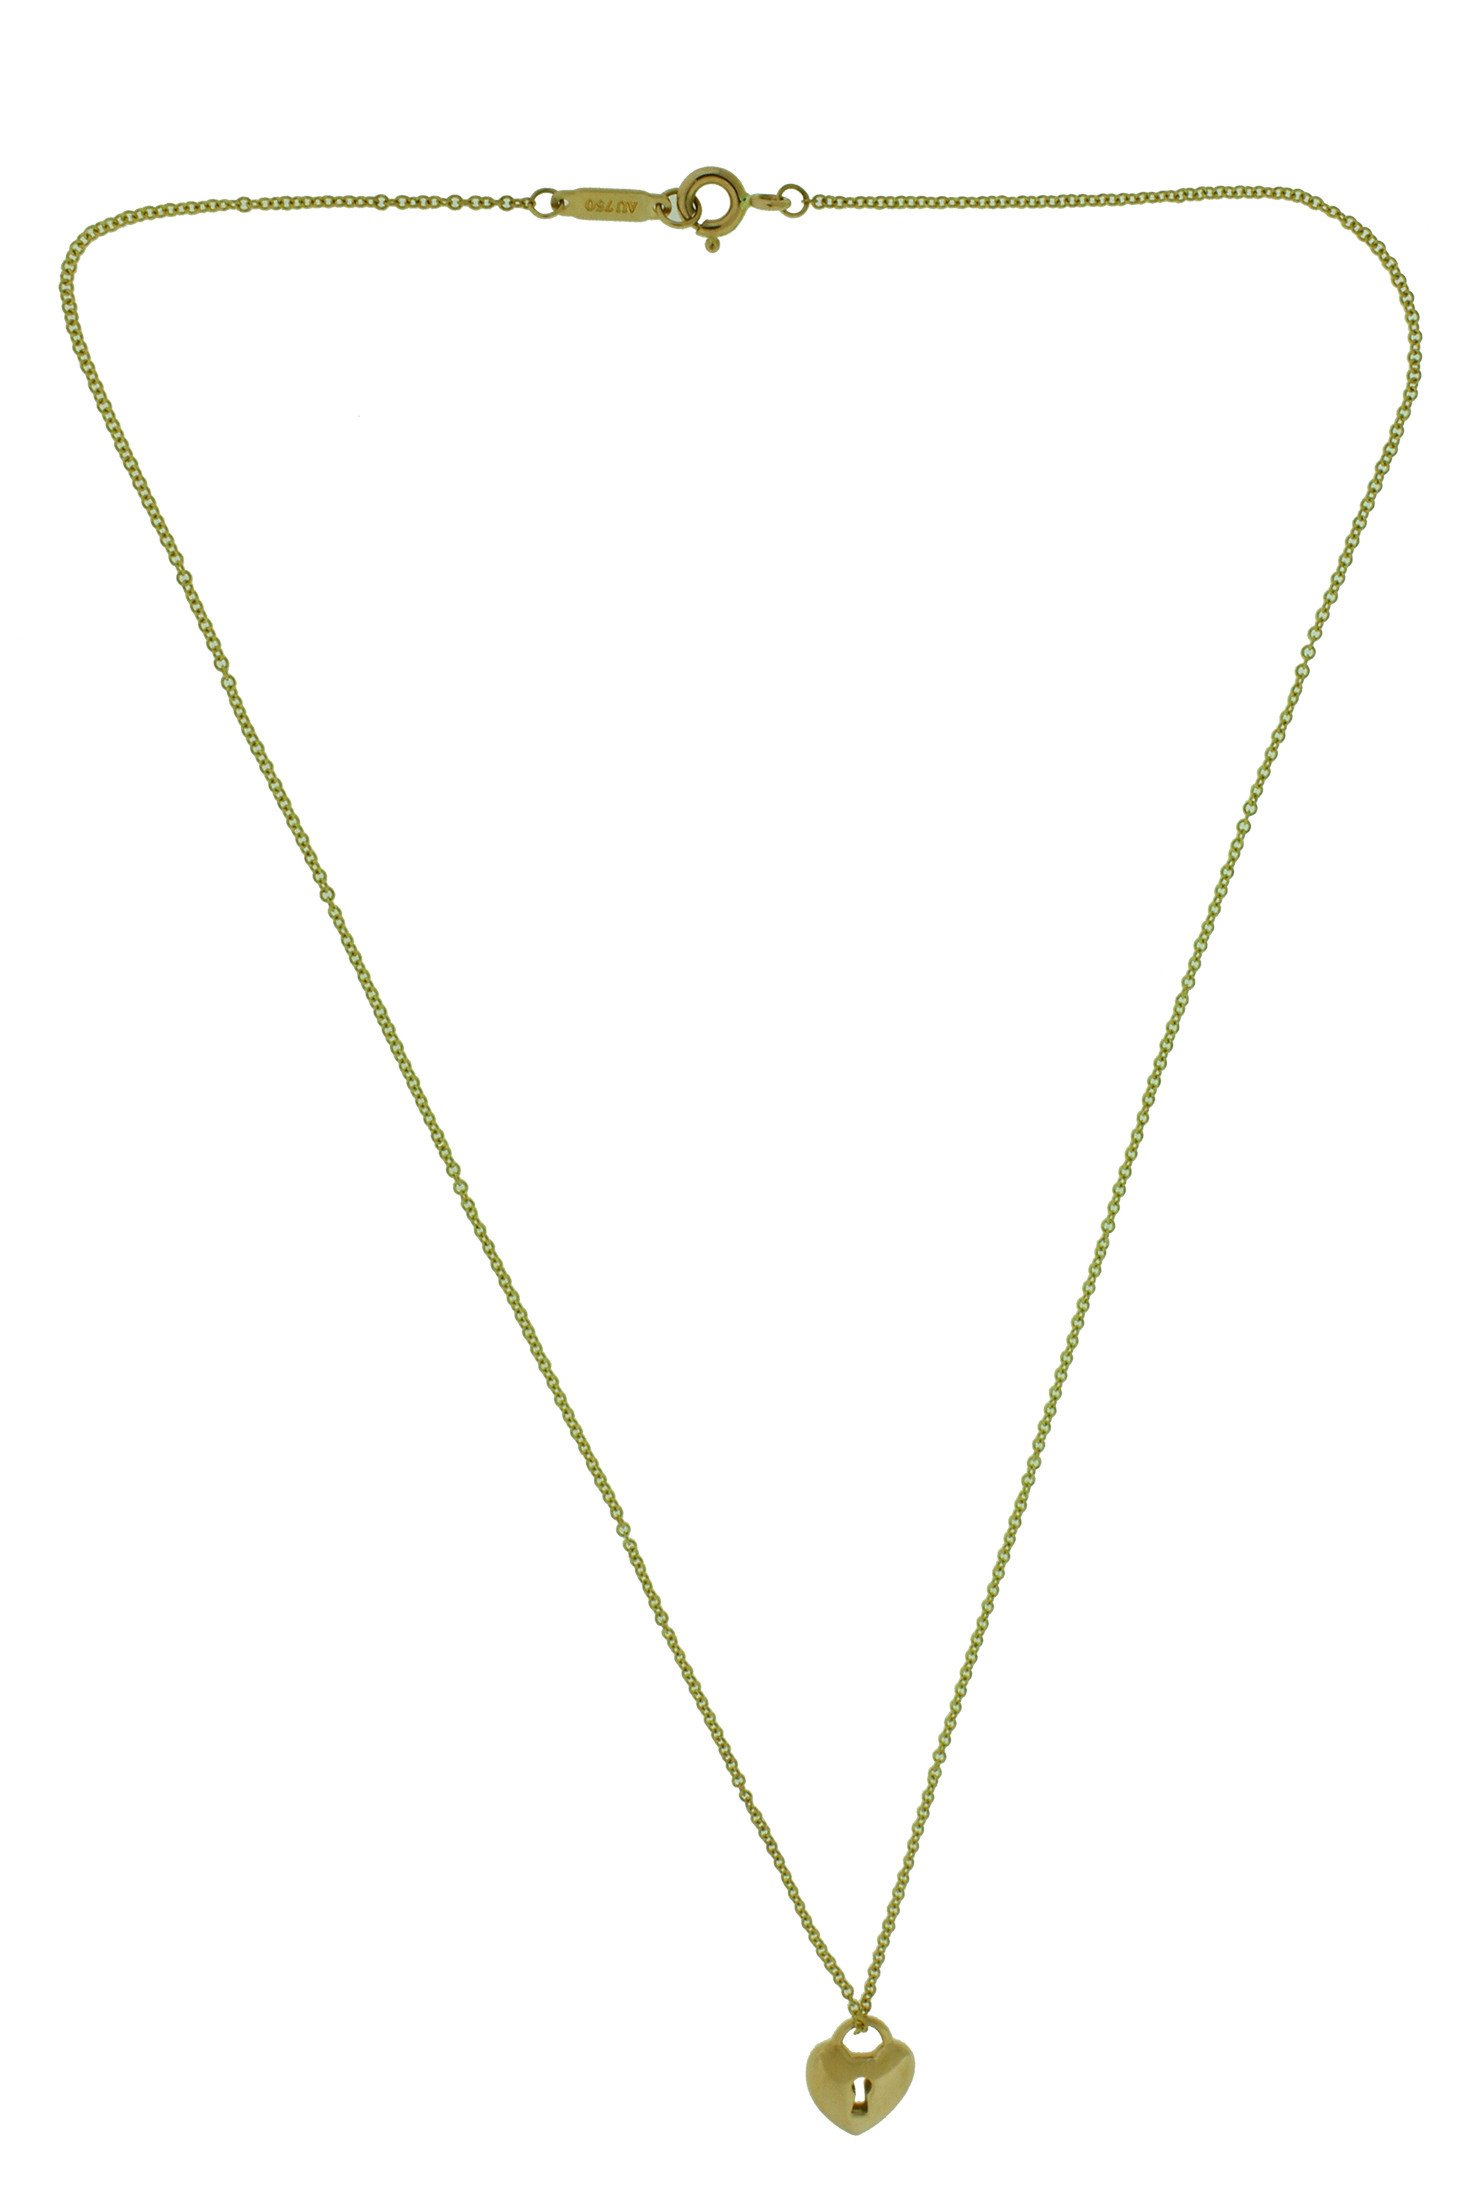 Tiffany & Co Locks small heart lock necklace in 18k rose gold 16 inches